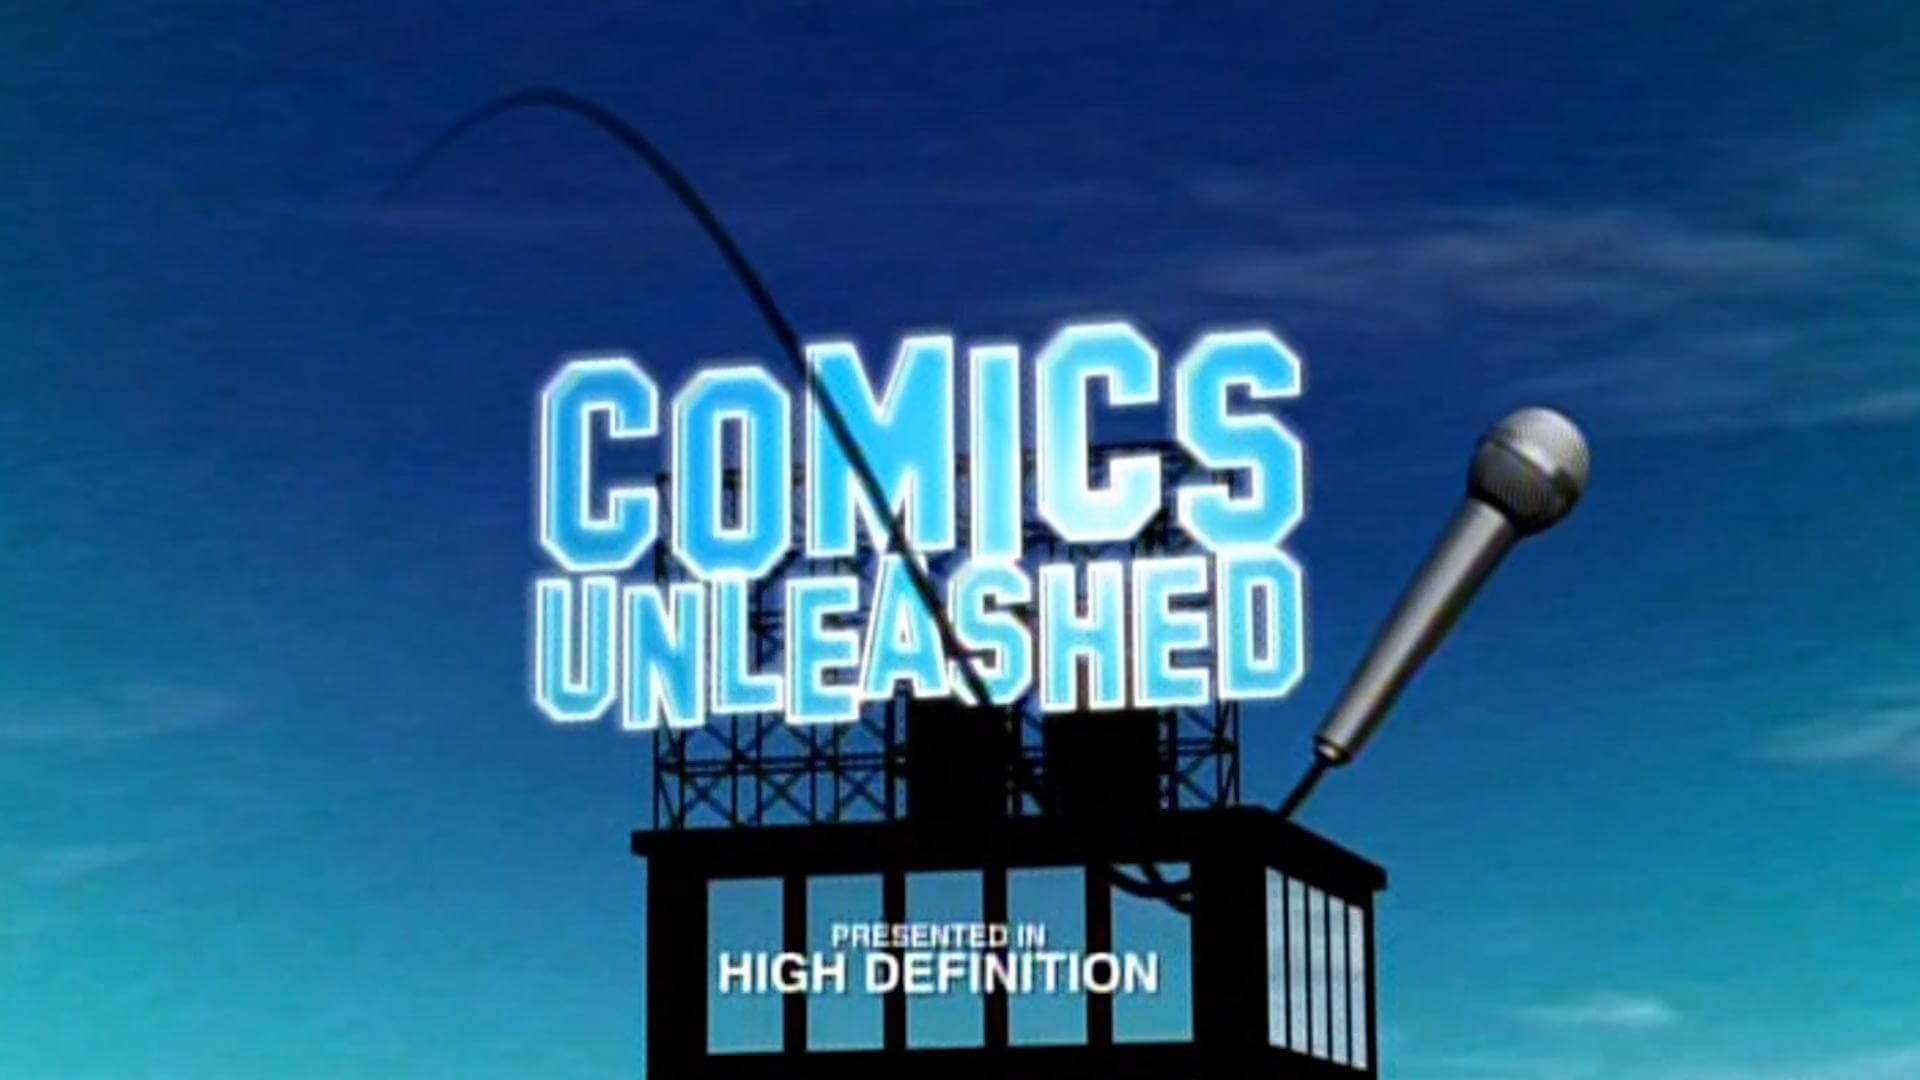 COMICS UNLEASHED WITH BYRON ALLEN